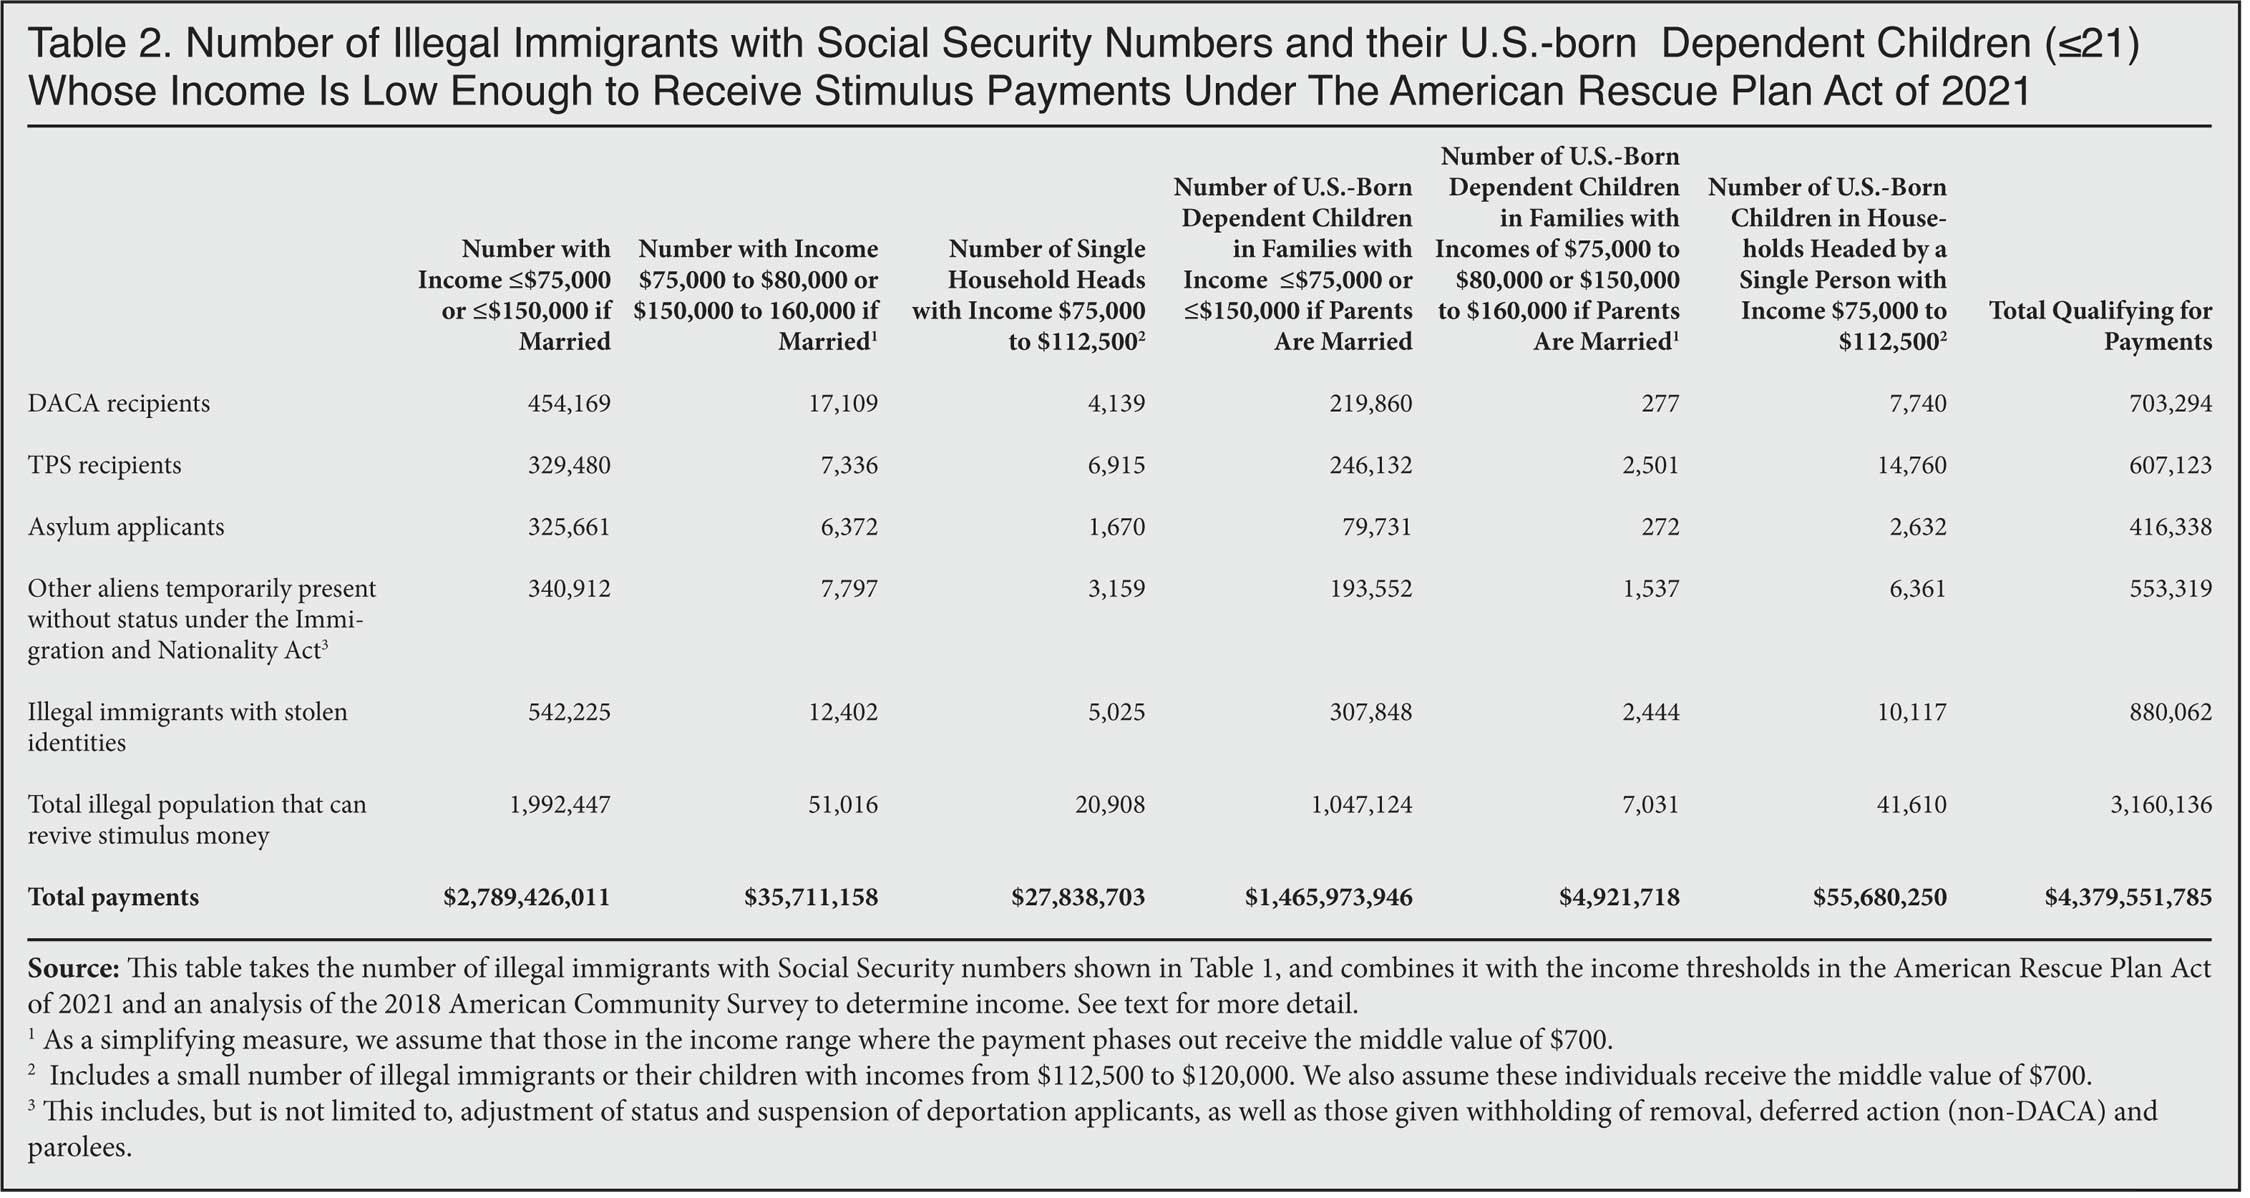 Table: Number of Illegal Immigrants with Social Security Numbers and their US born Dependent Children